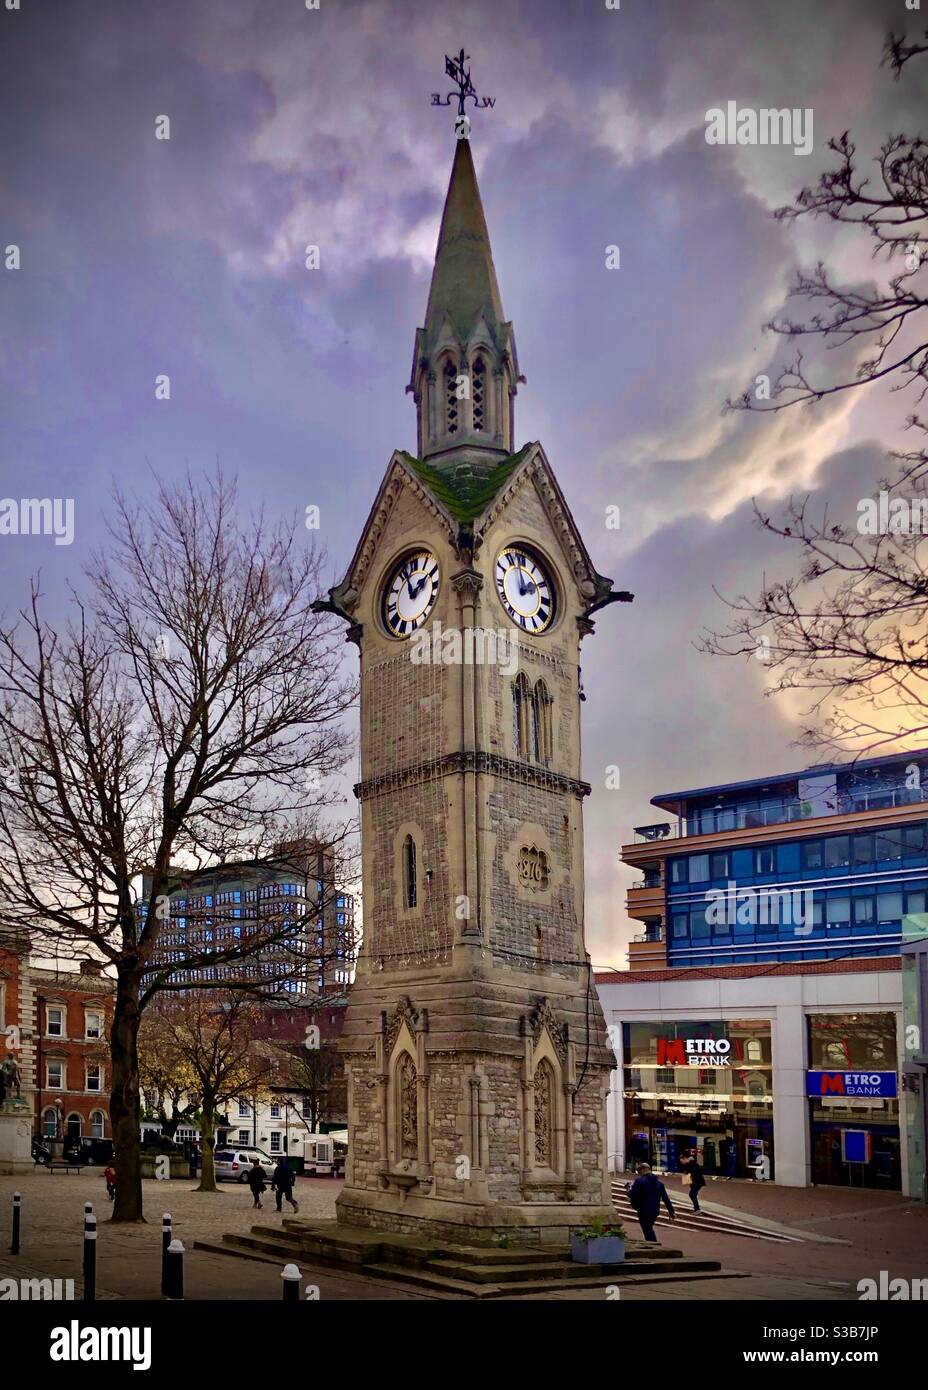 The clock tower in Aylesbury’s Market Square on a lockdown Sunday in November Stock Photo